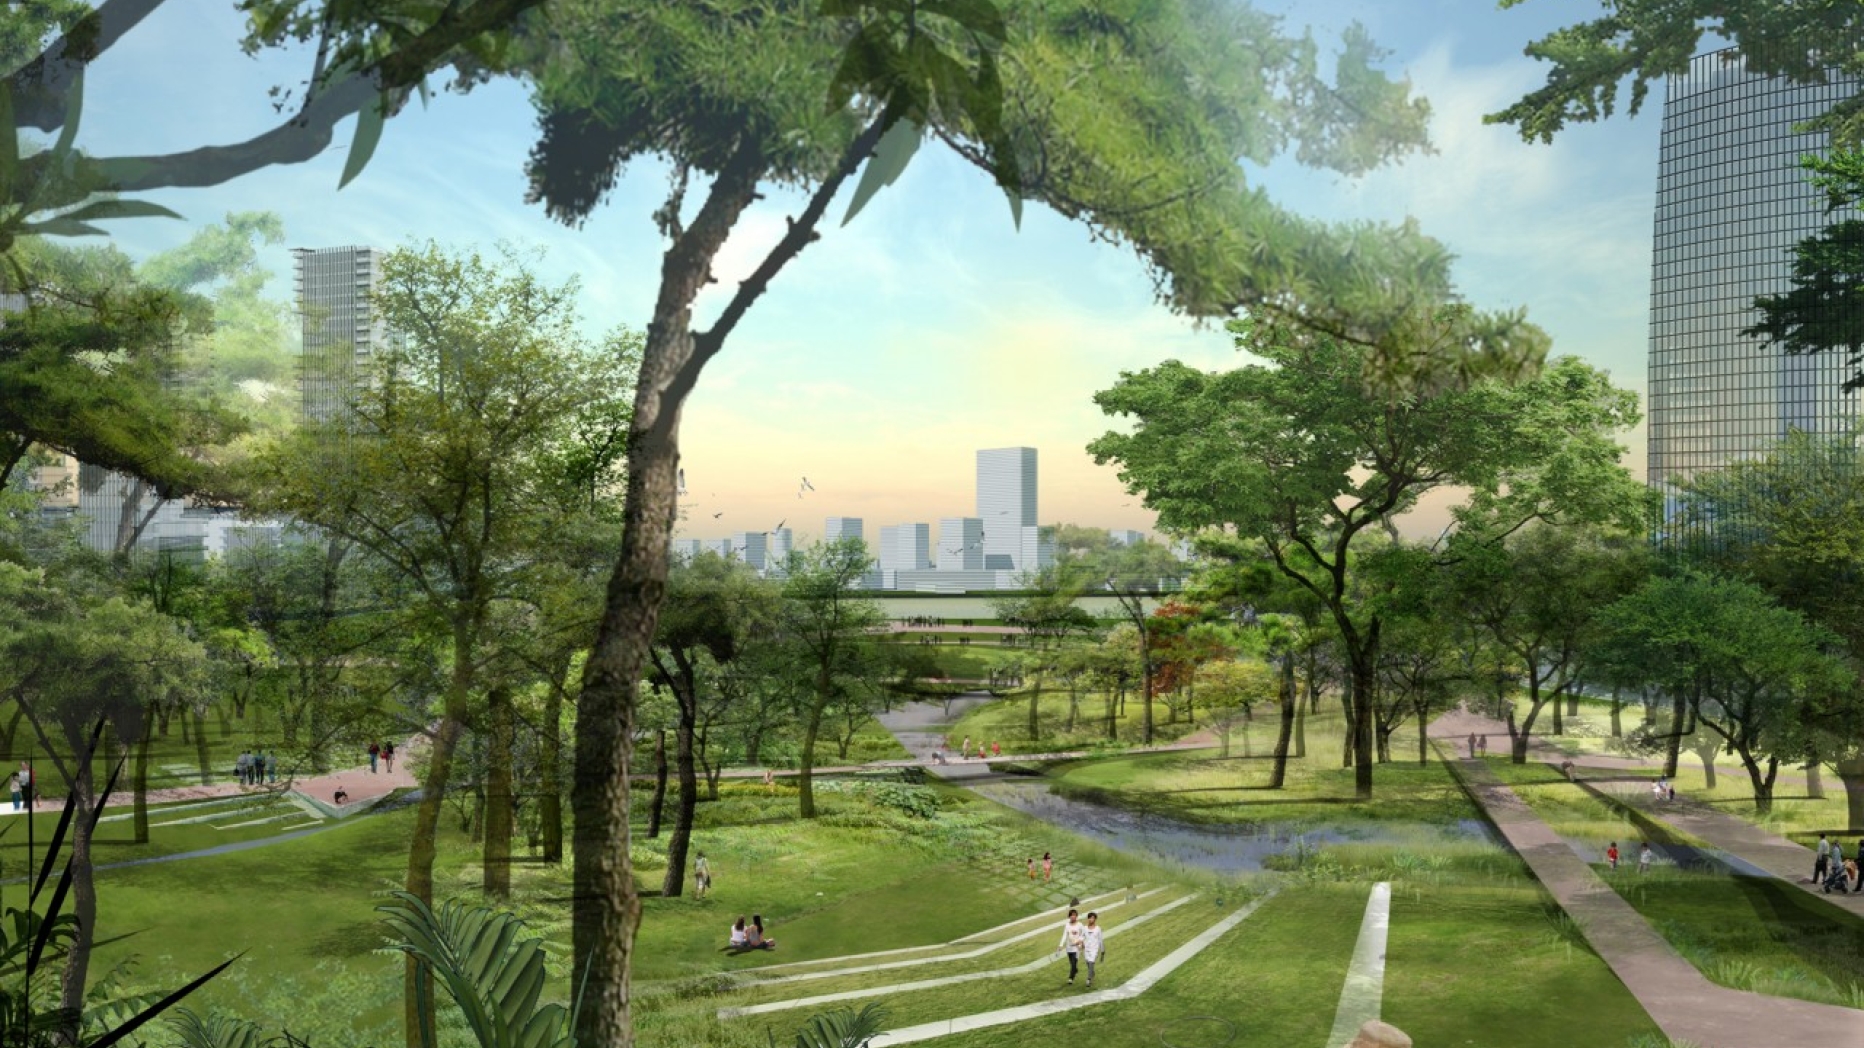 Visualization of architectural project in park area.